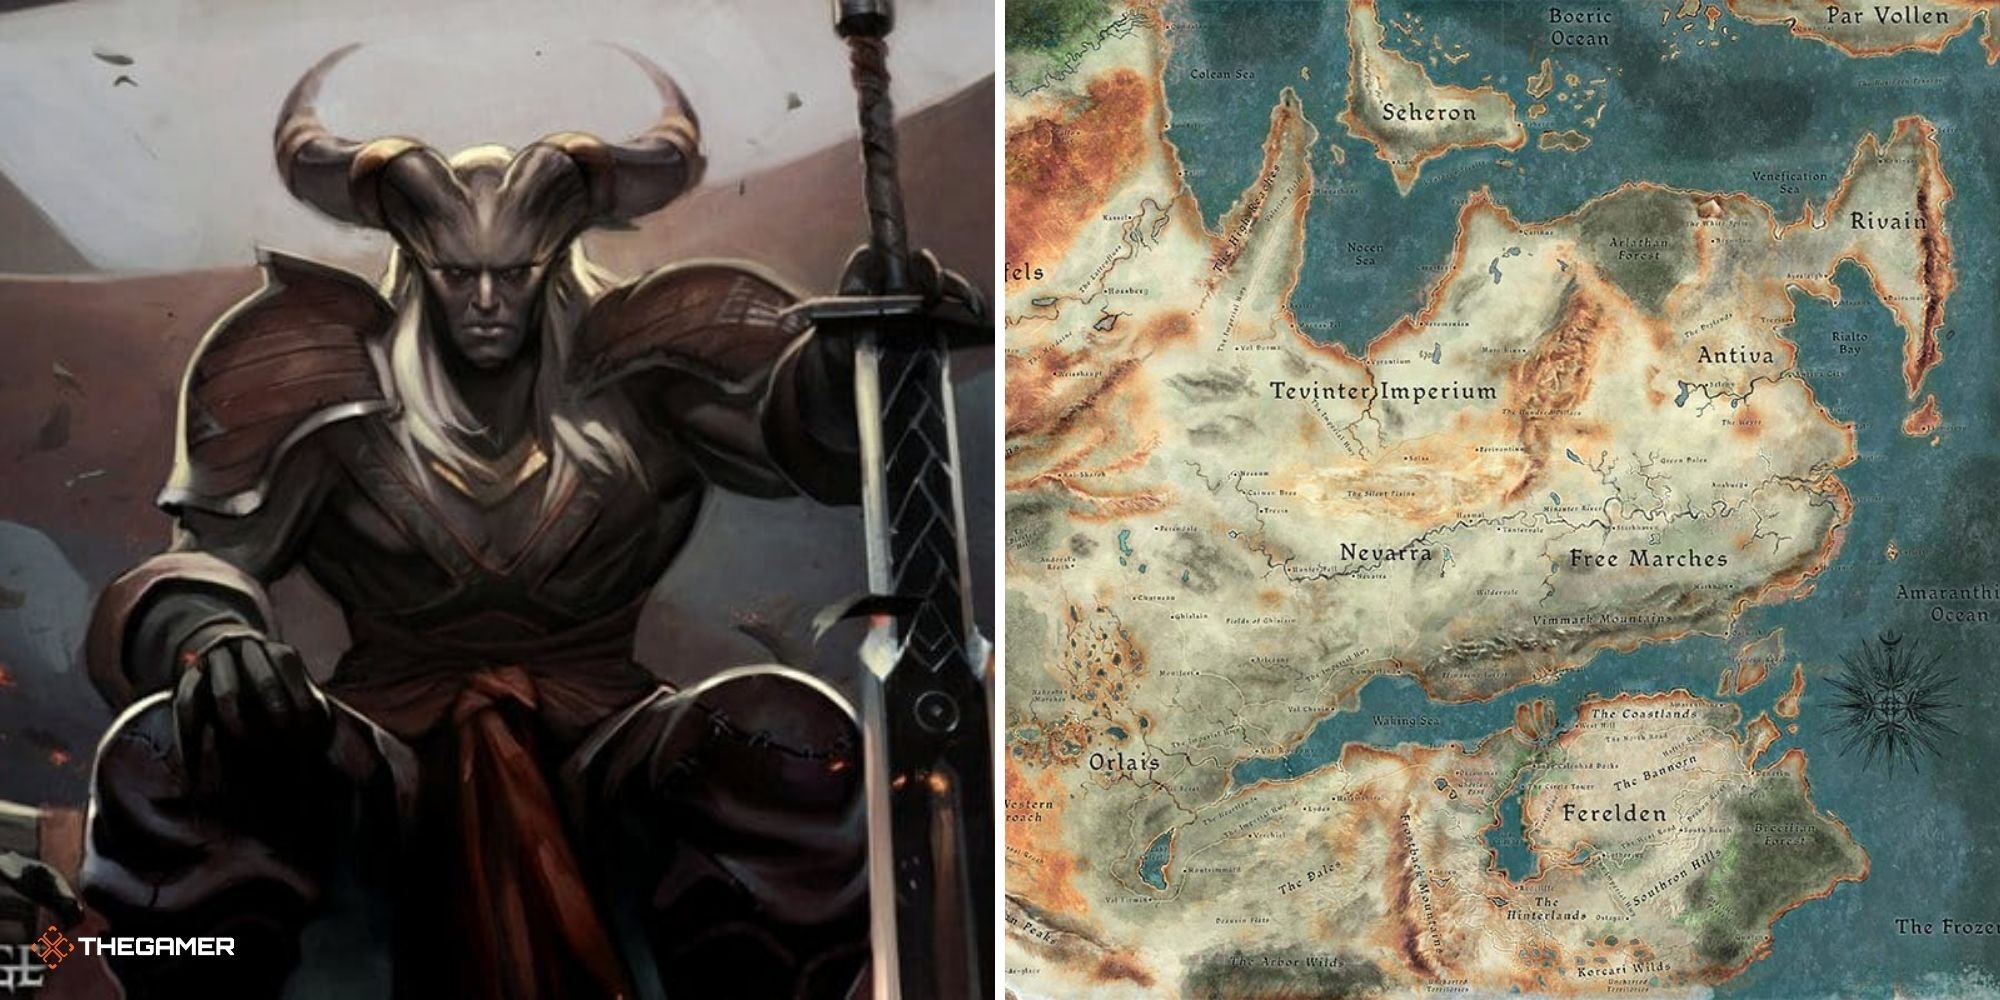 Dragon Age: What's The Difference Between The Qunari And The Kossith?